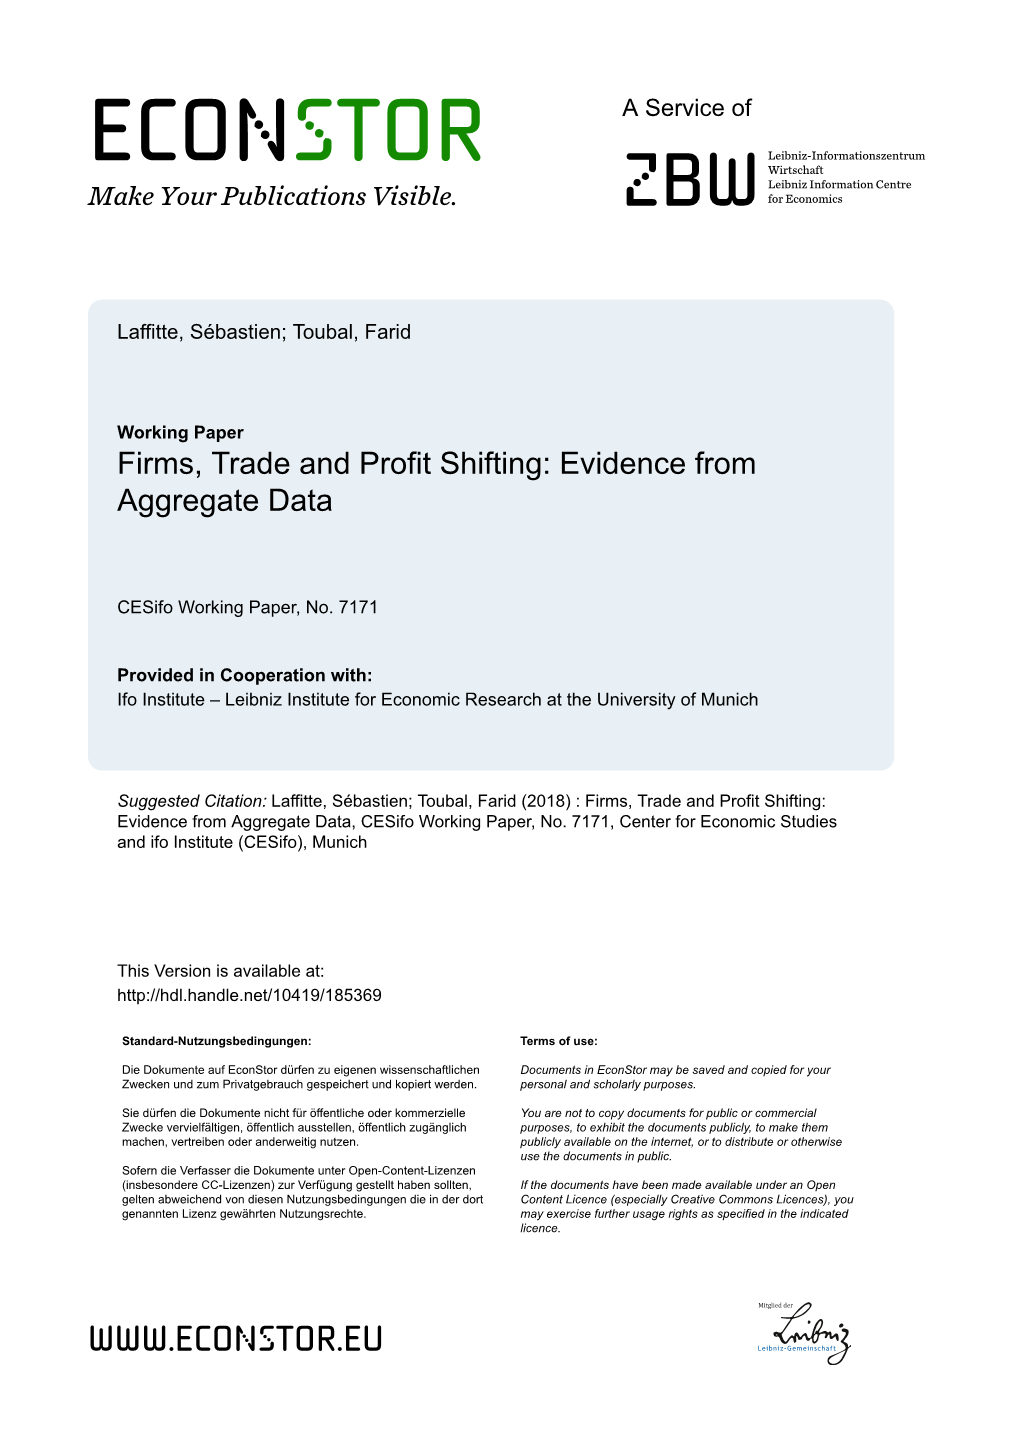 Firms, Trade and Profit Shifting: Evidence from Aggregate Data